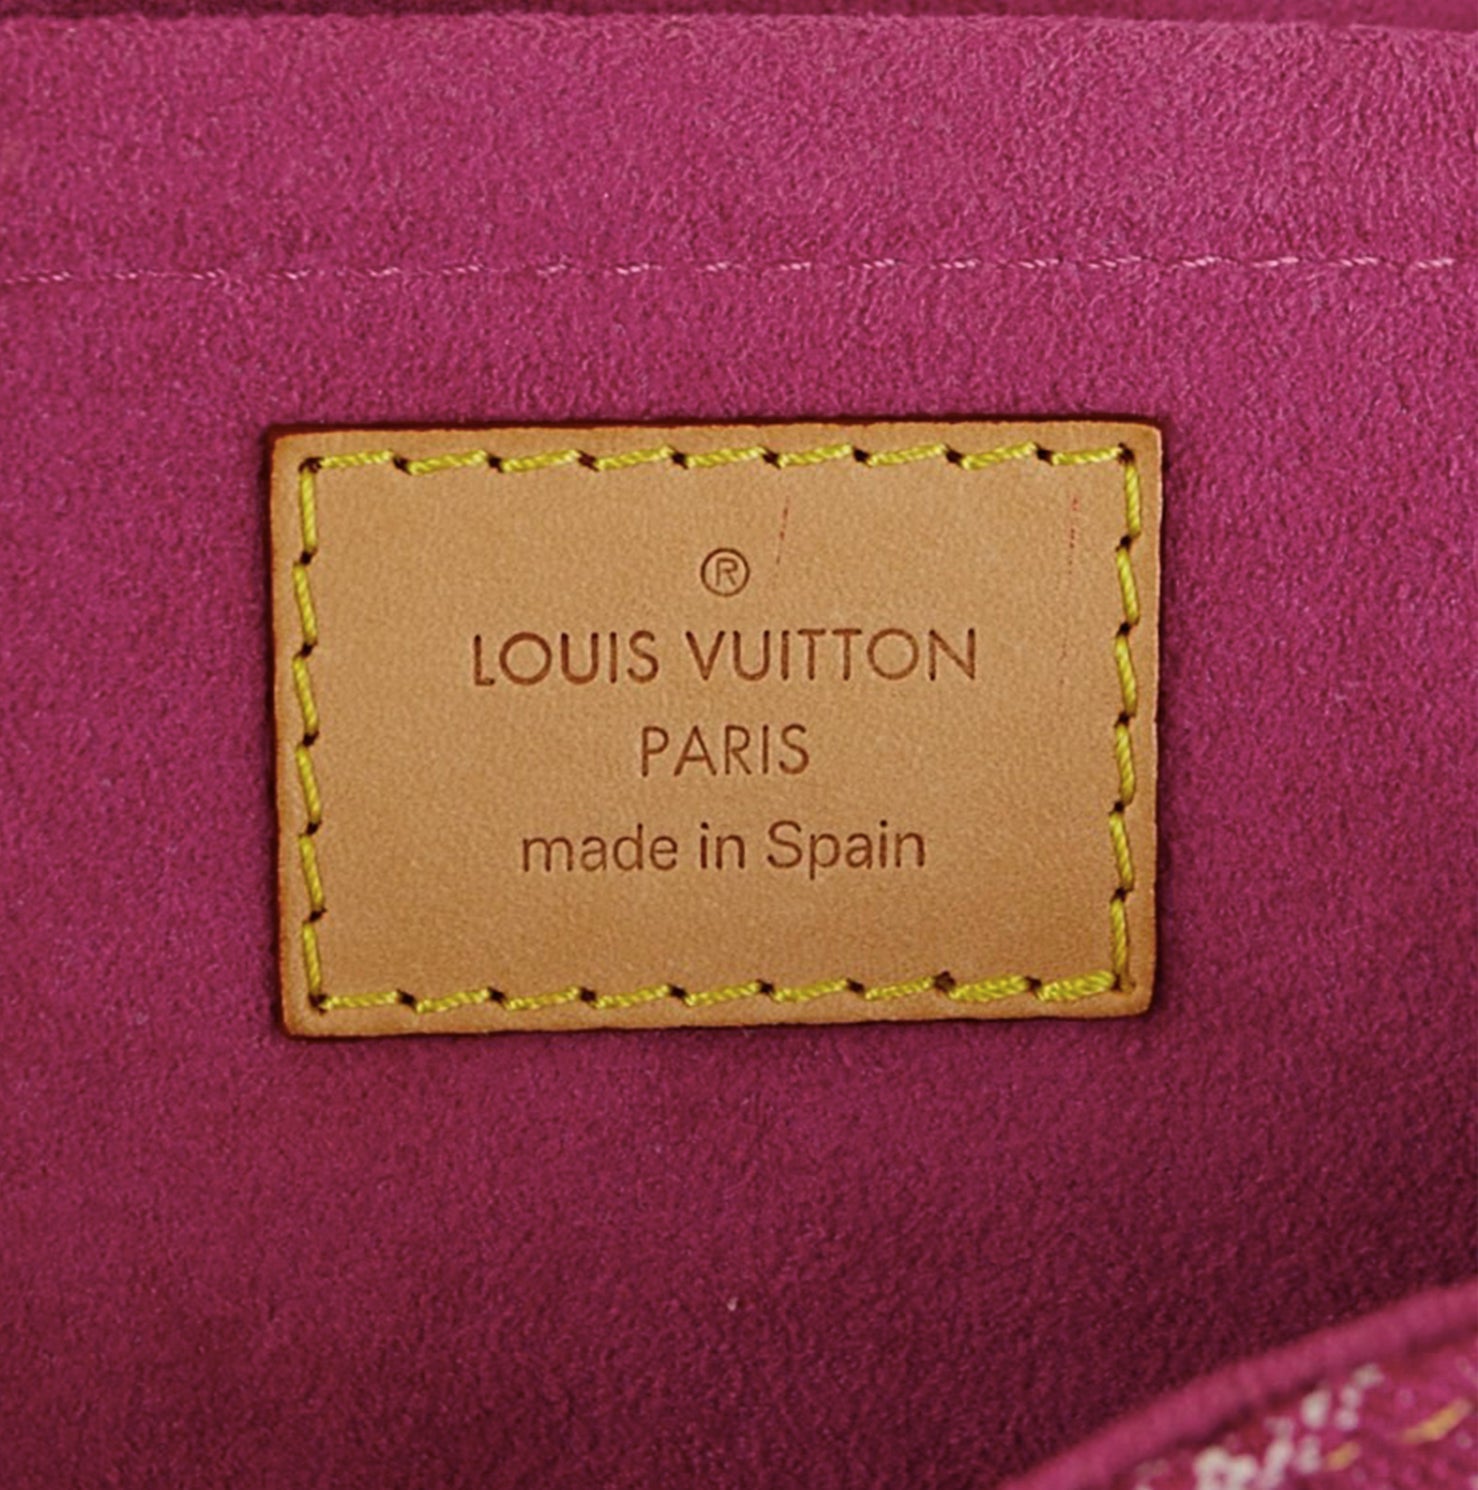 Louis Vuitton Pleaty Pink Denim Bag ○ Labellov ○ Buy and Sell Authentic  Luxury